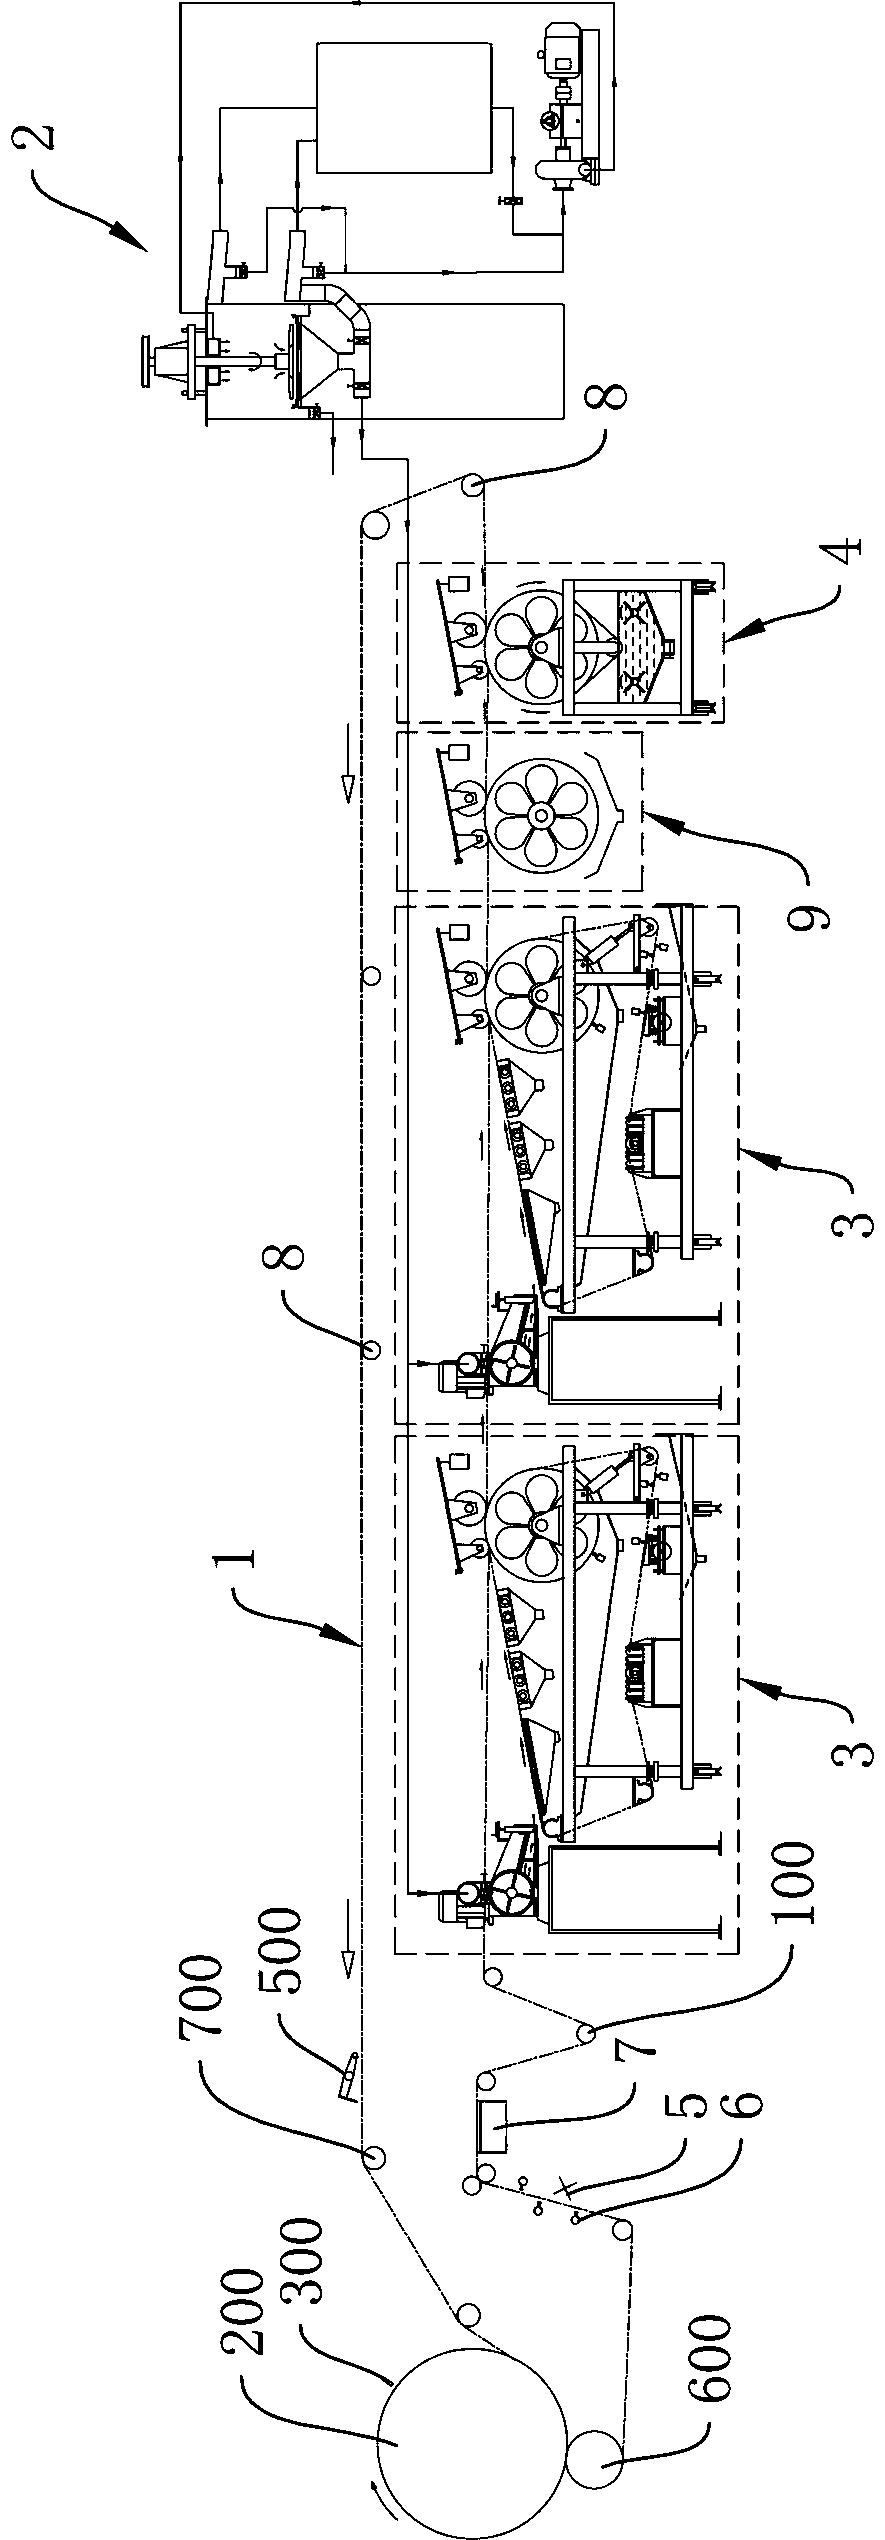 Jet layup board-producing system